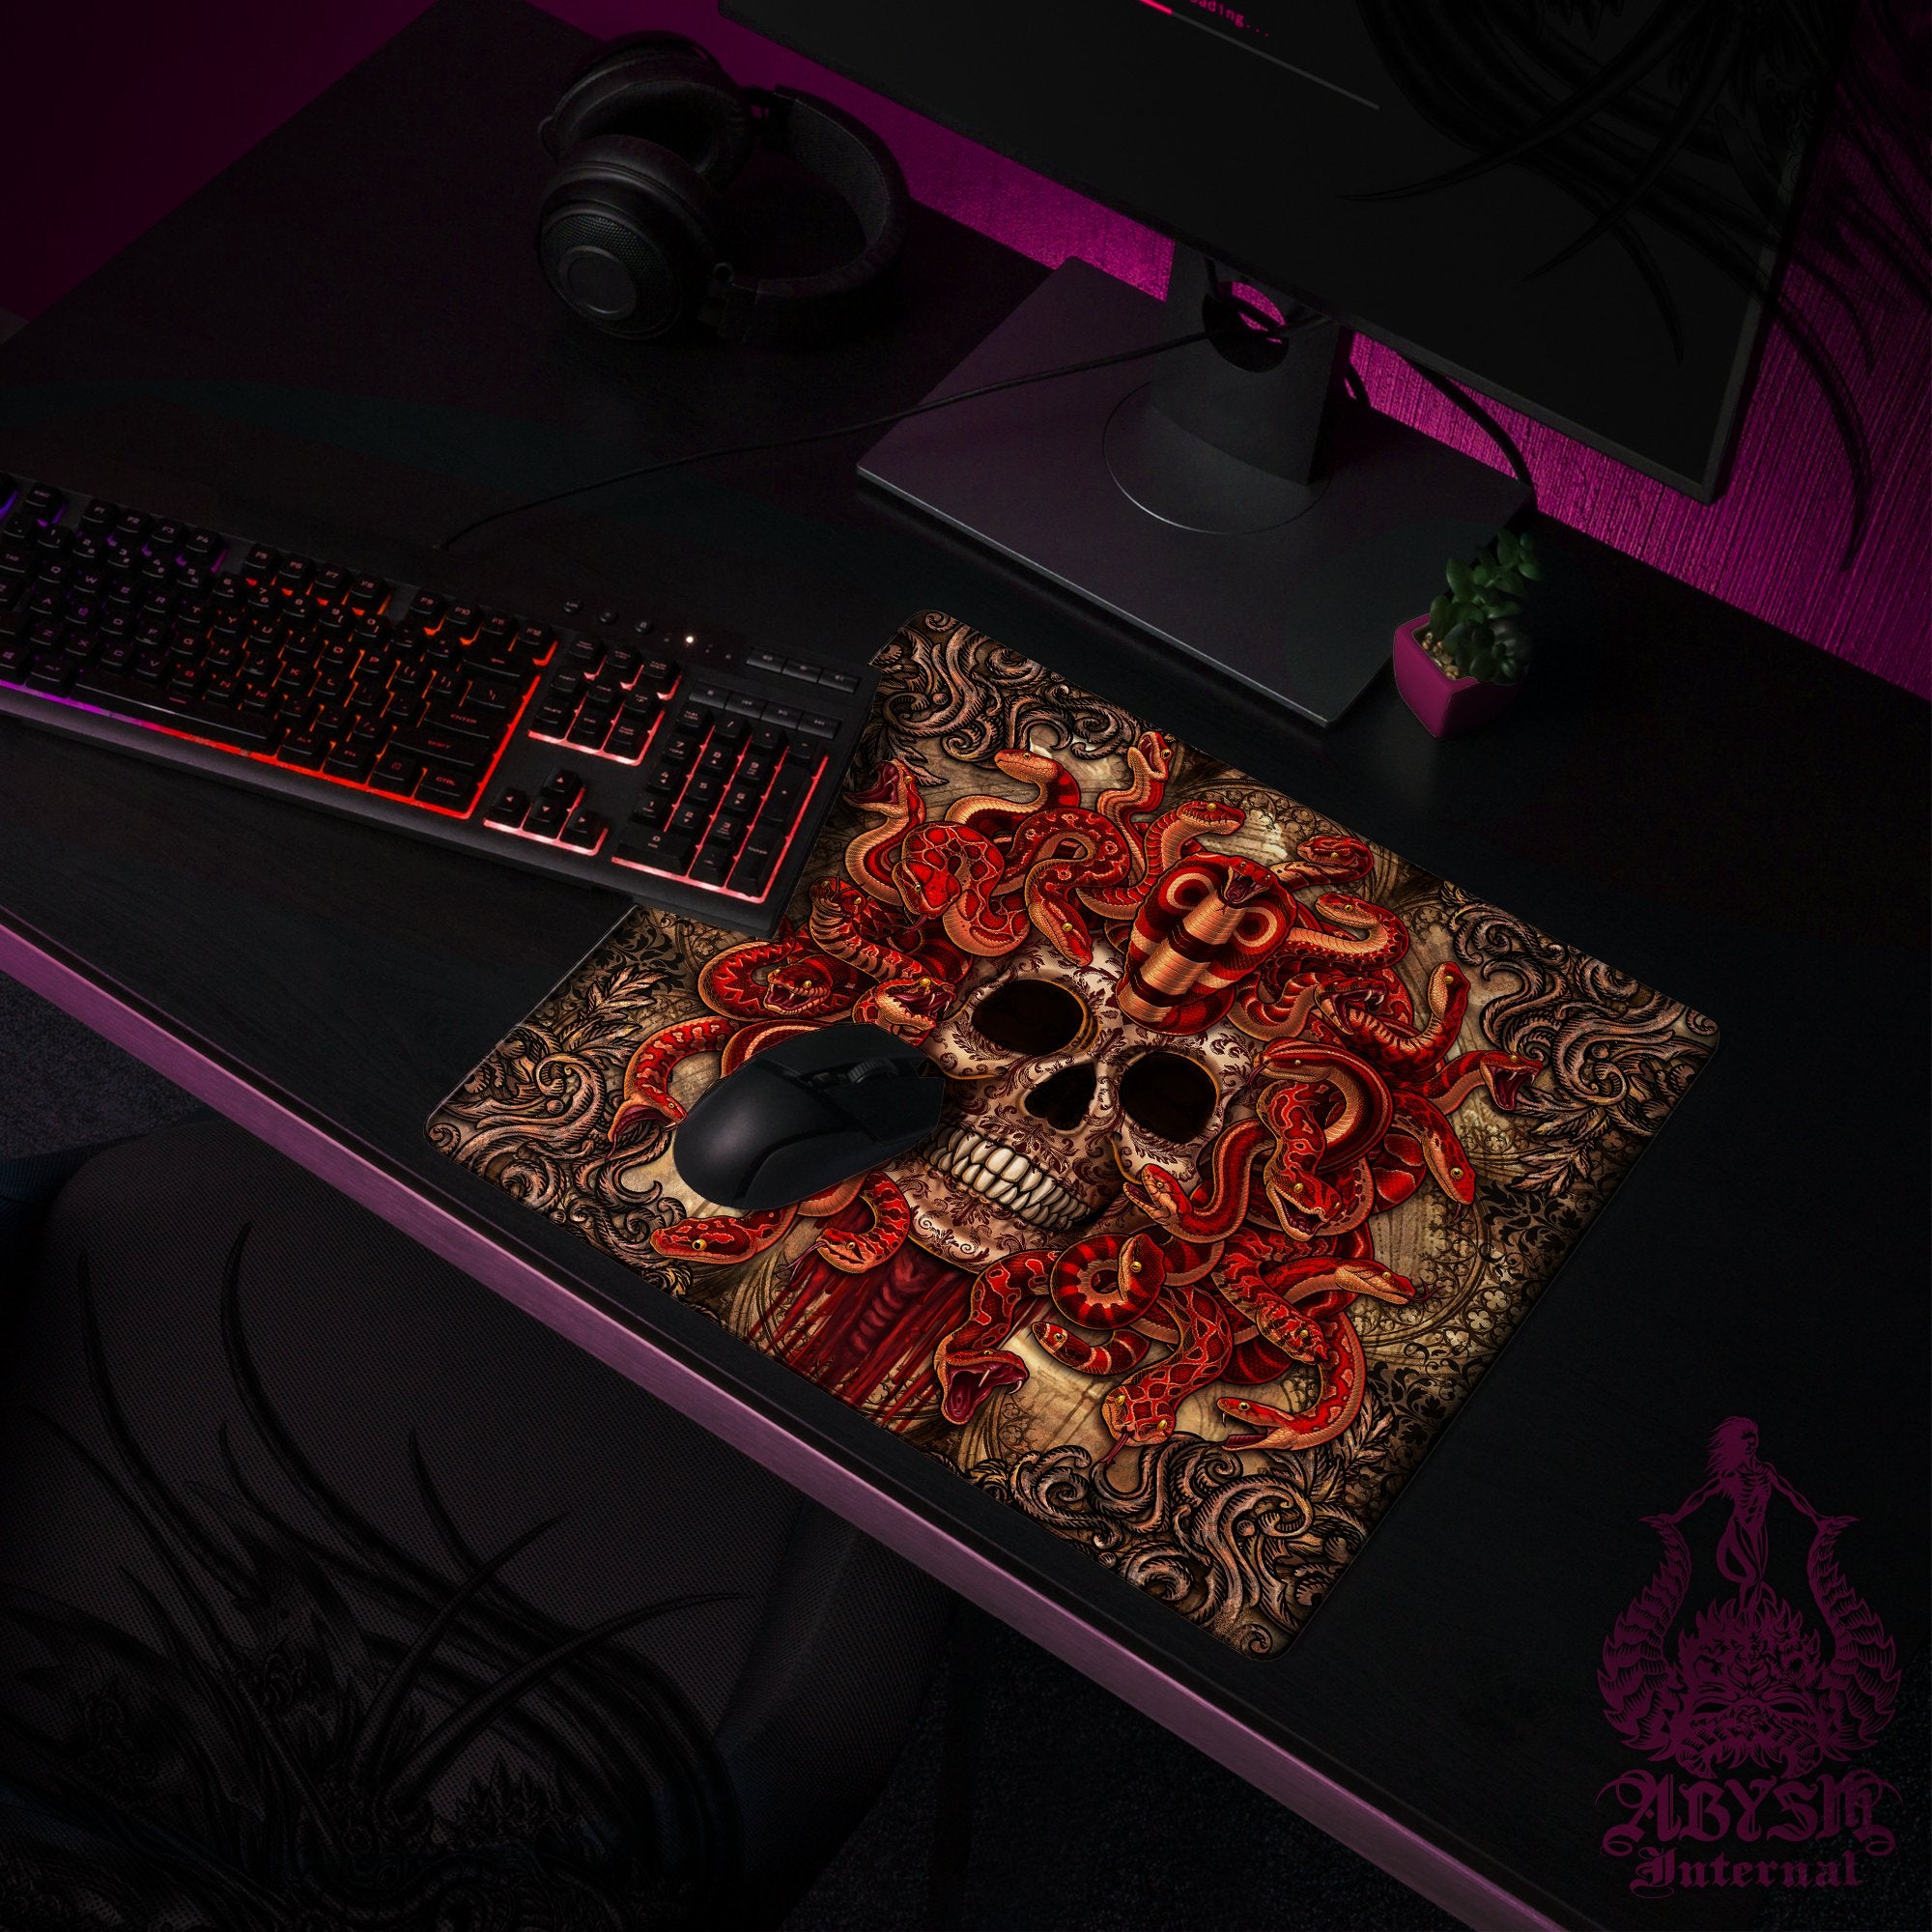 Skull Mouse Pad, Gothic Horror Gaming Desk Mat, Goth Workpad, Medusa Table Protector Cover, Dark Fantasy Art Print - Beige, 4 Face Options - Abysm Internal